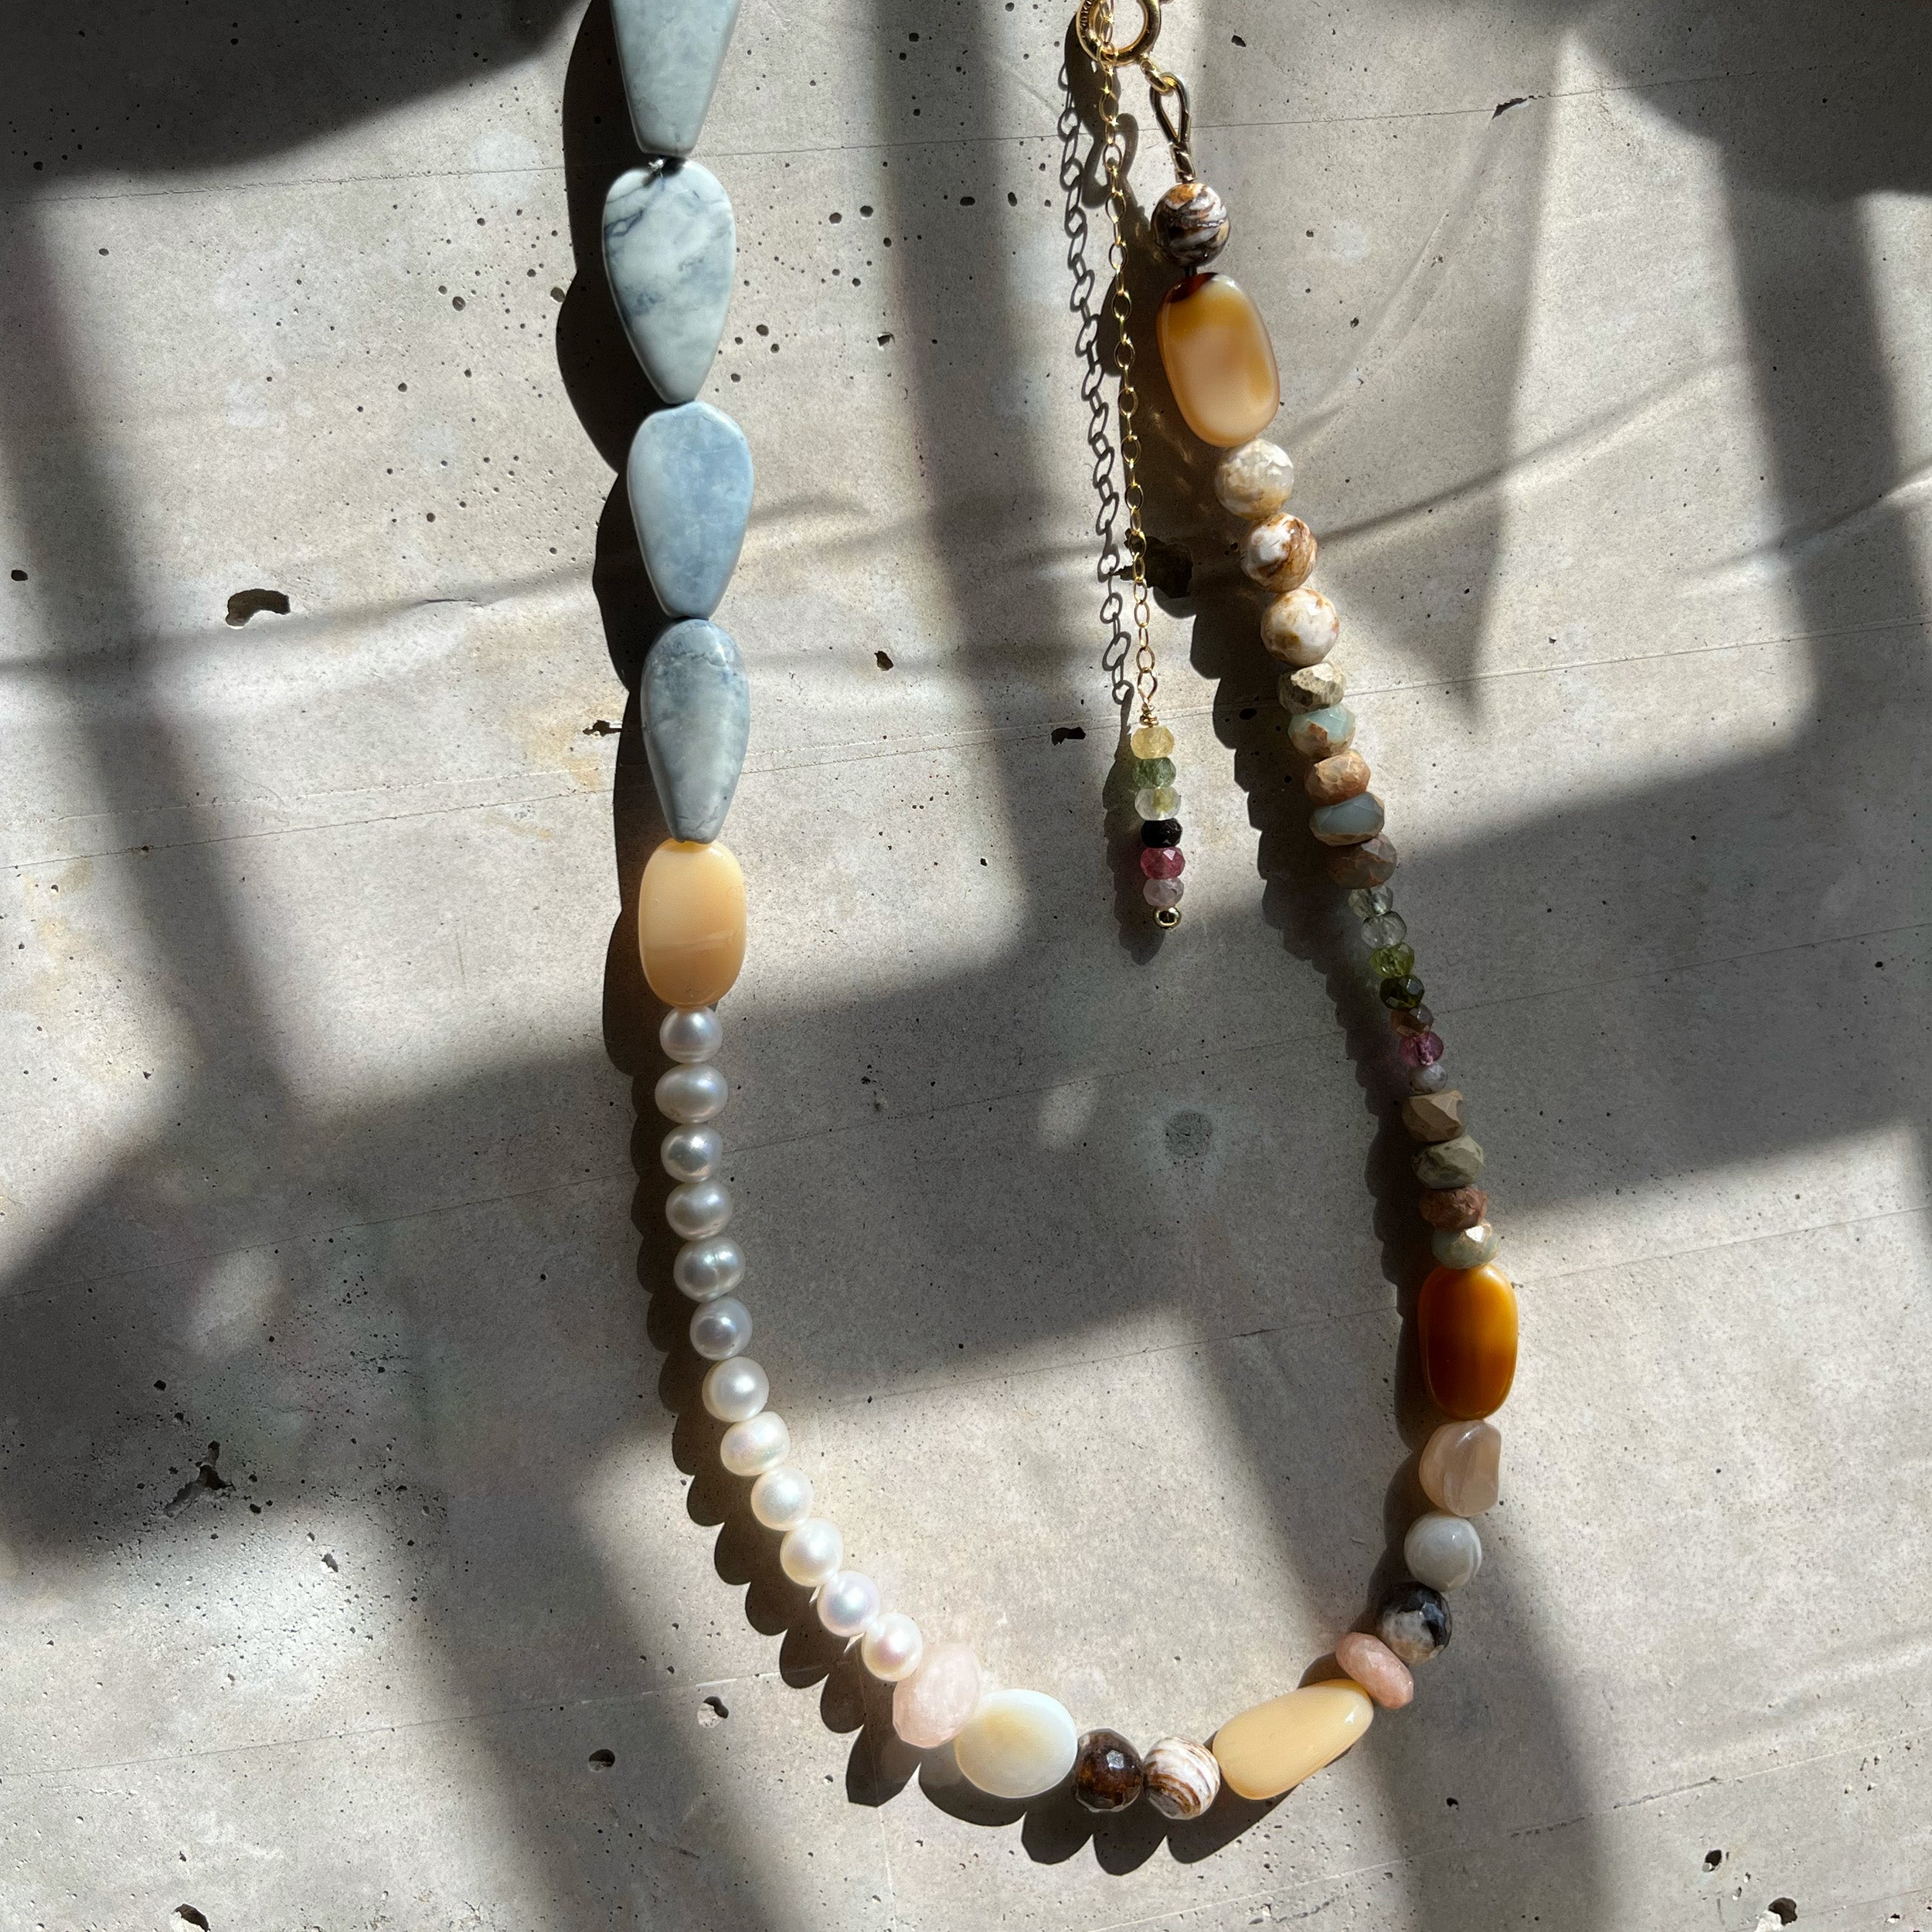 One of a Kind Beach Vibe Multi-Gem Necklace